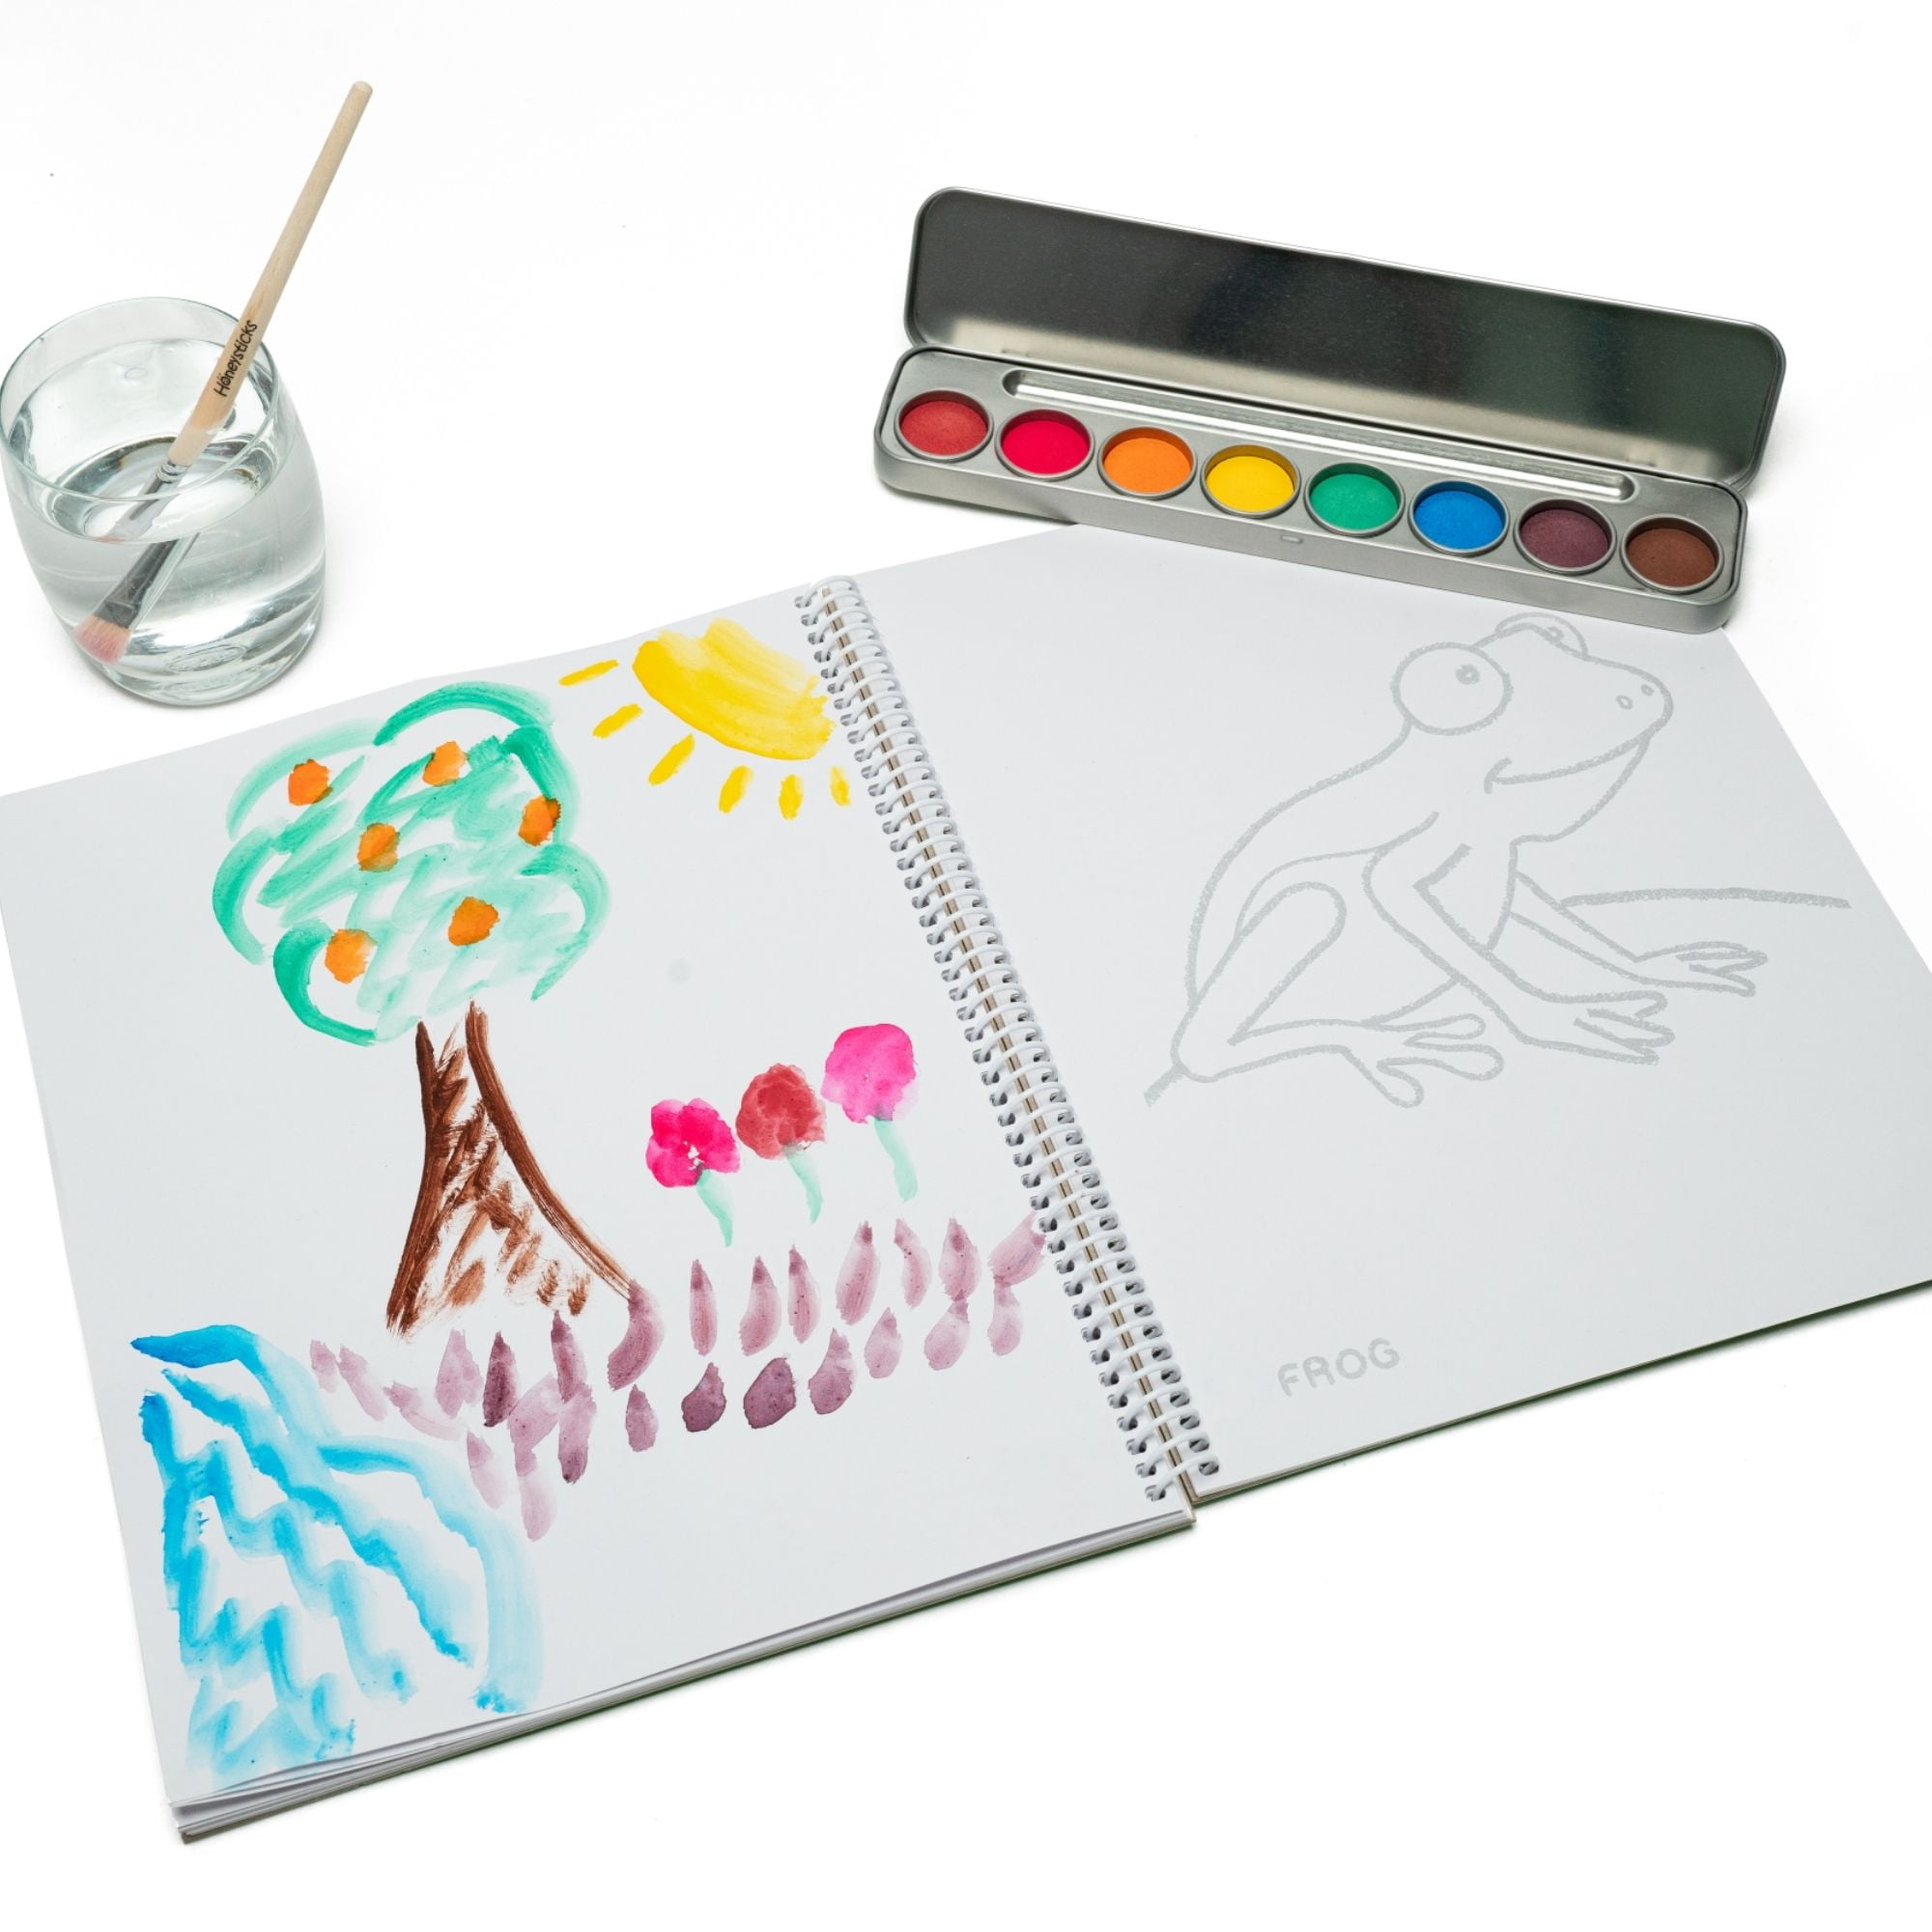 How to Make Watercolor Paints That are Safe for Kids, eHow